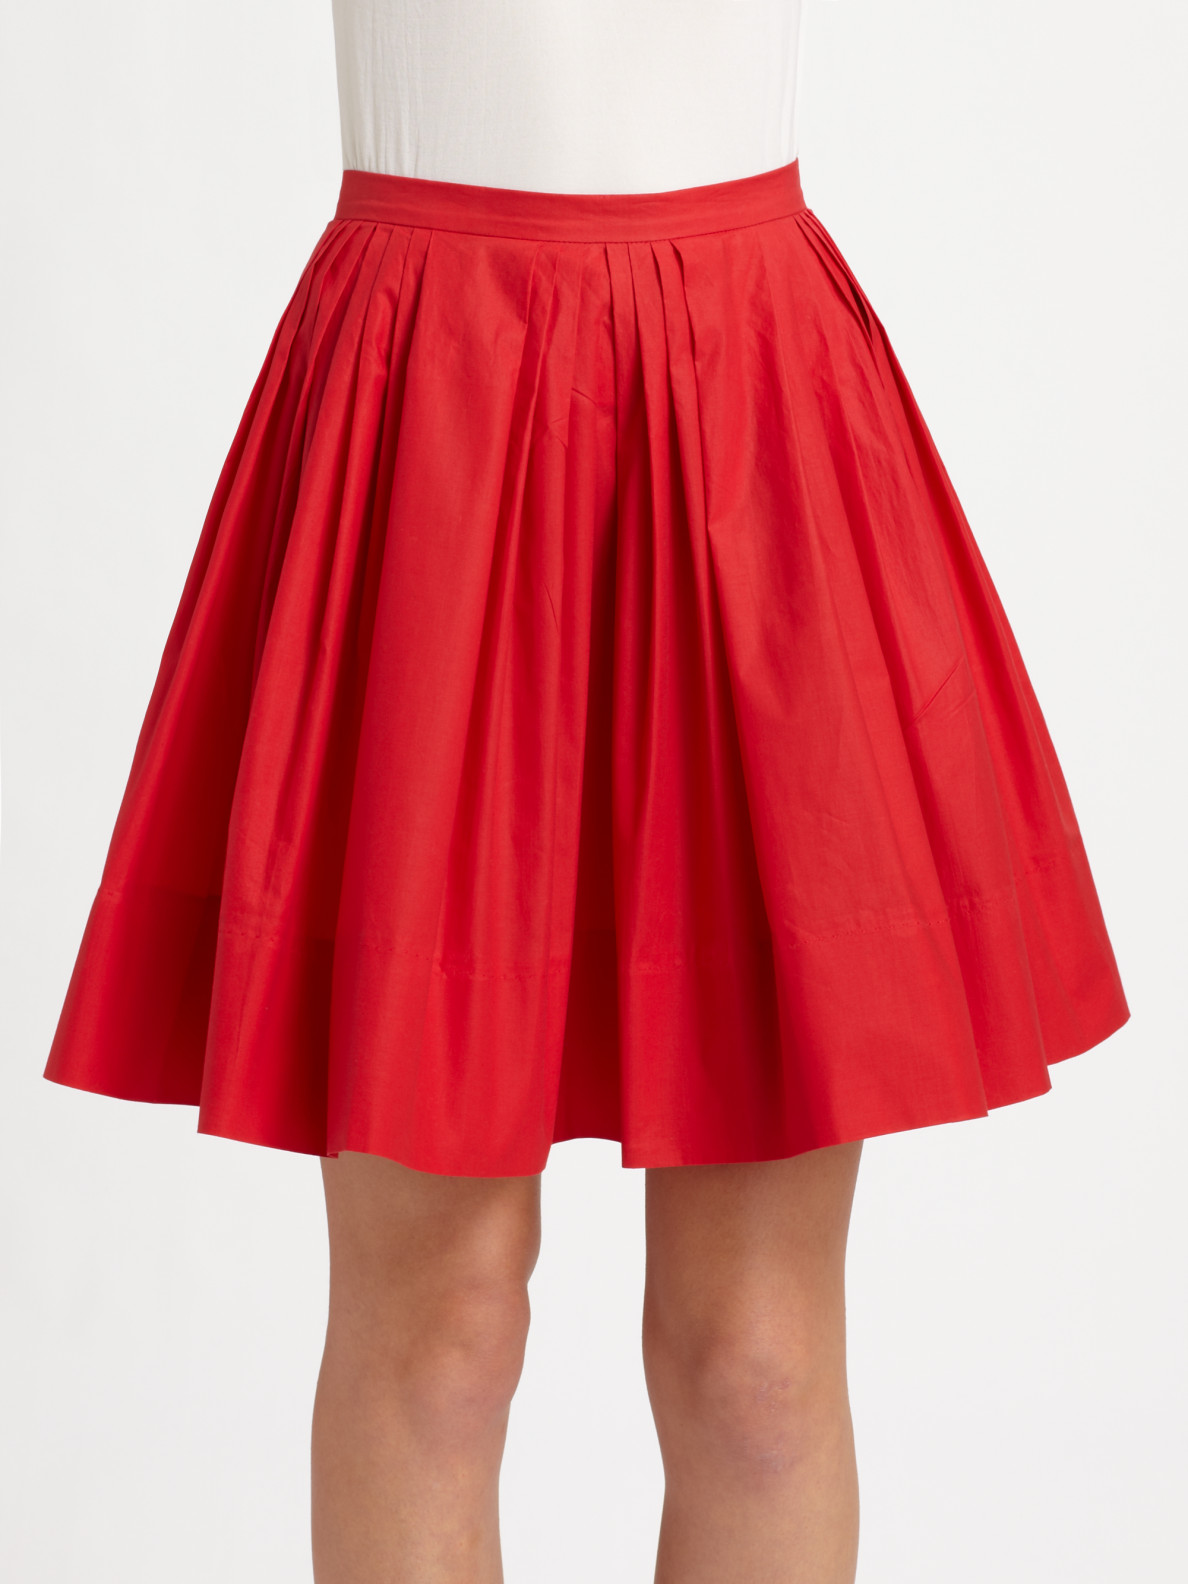 Lyst - Sonia By Sonia Rykiel Pleated Flared Skirt in Red